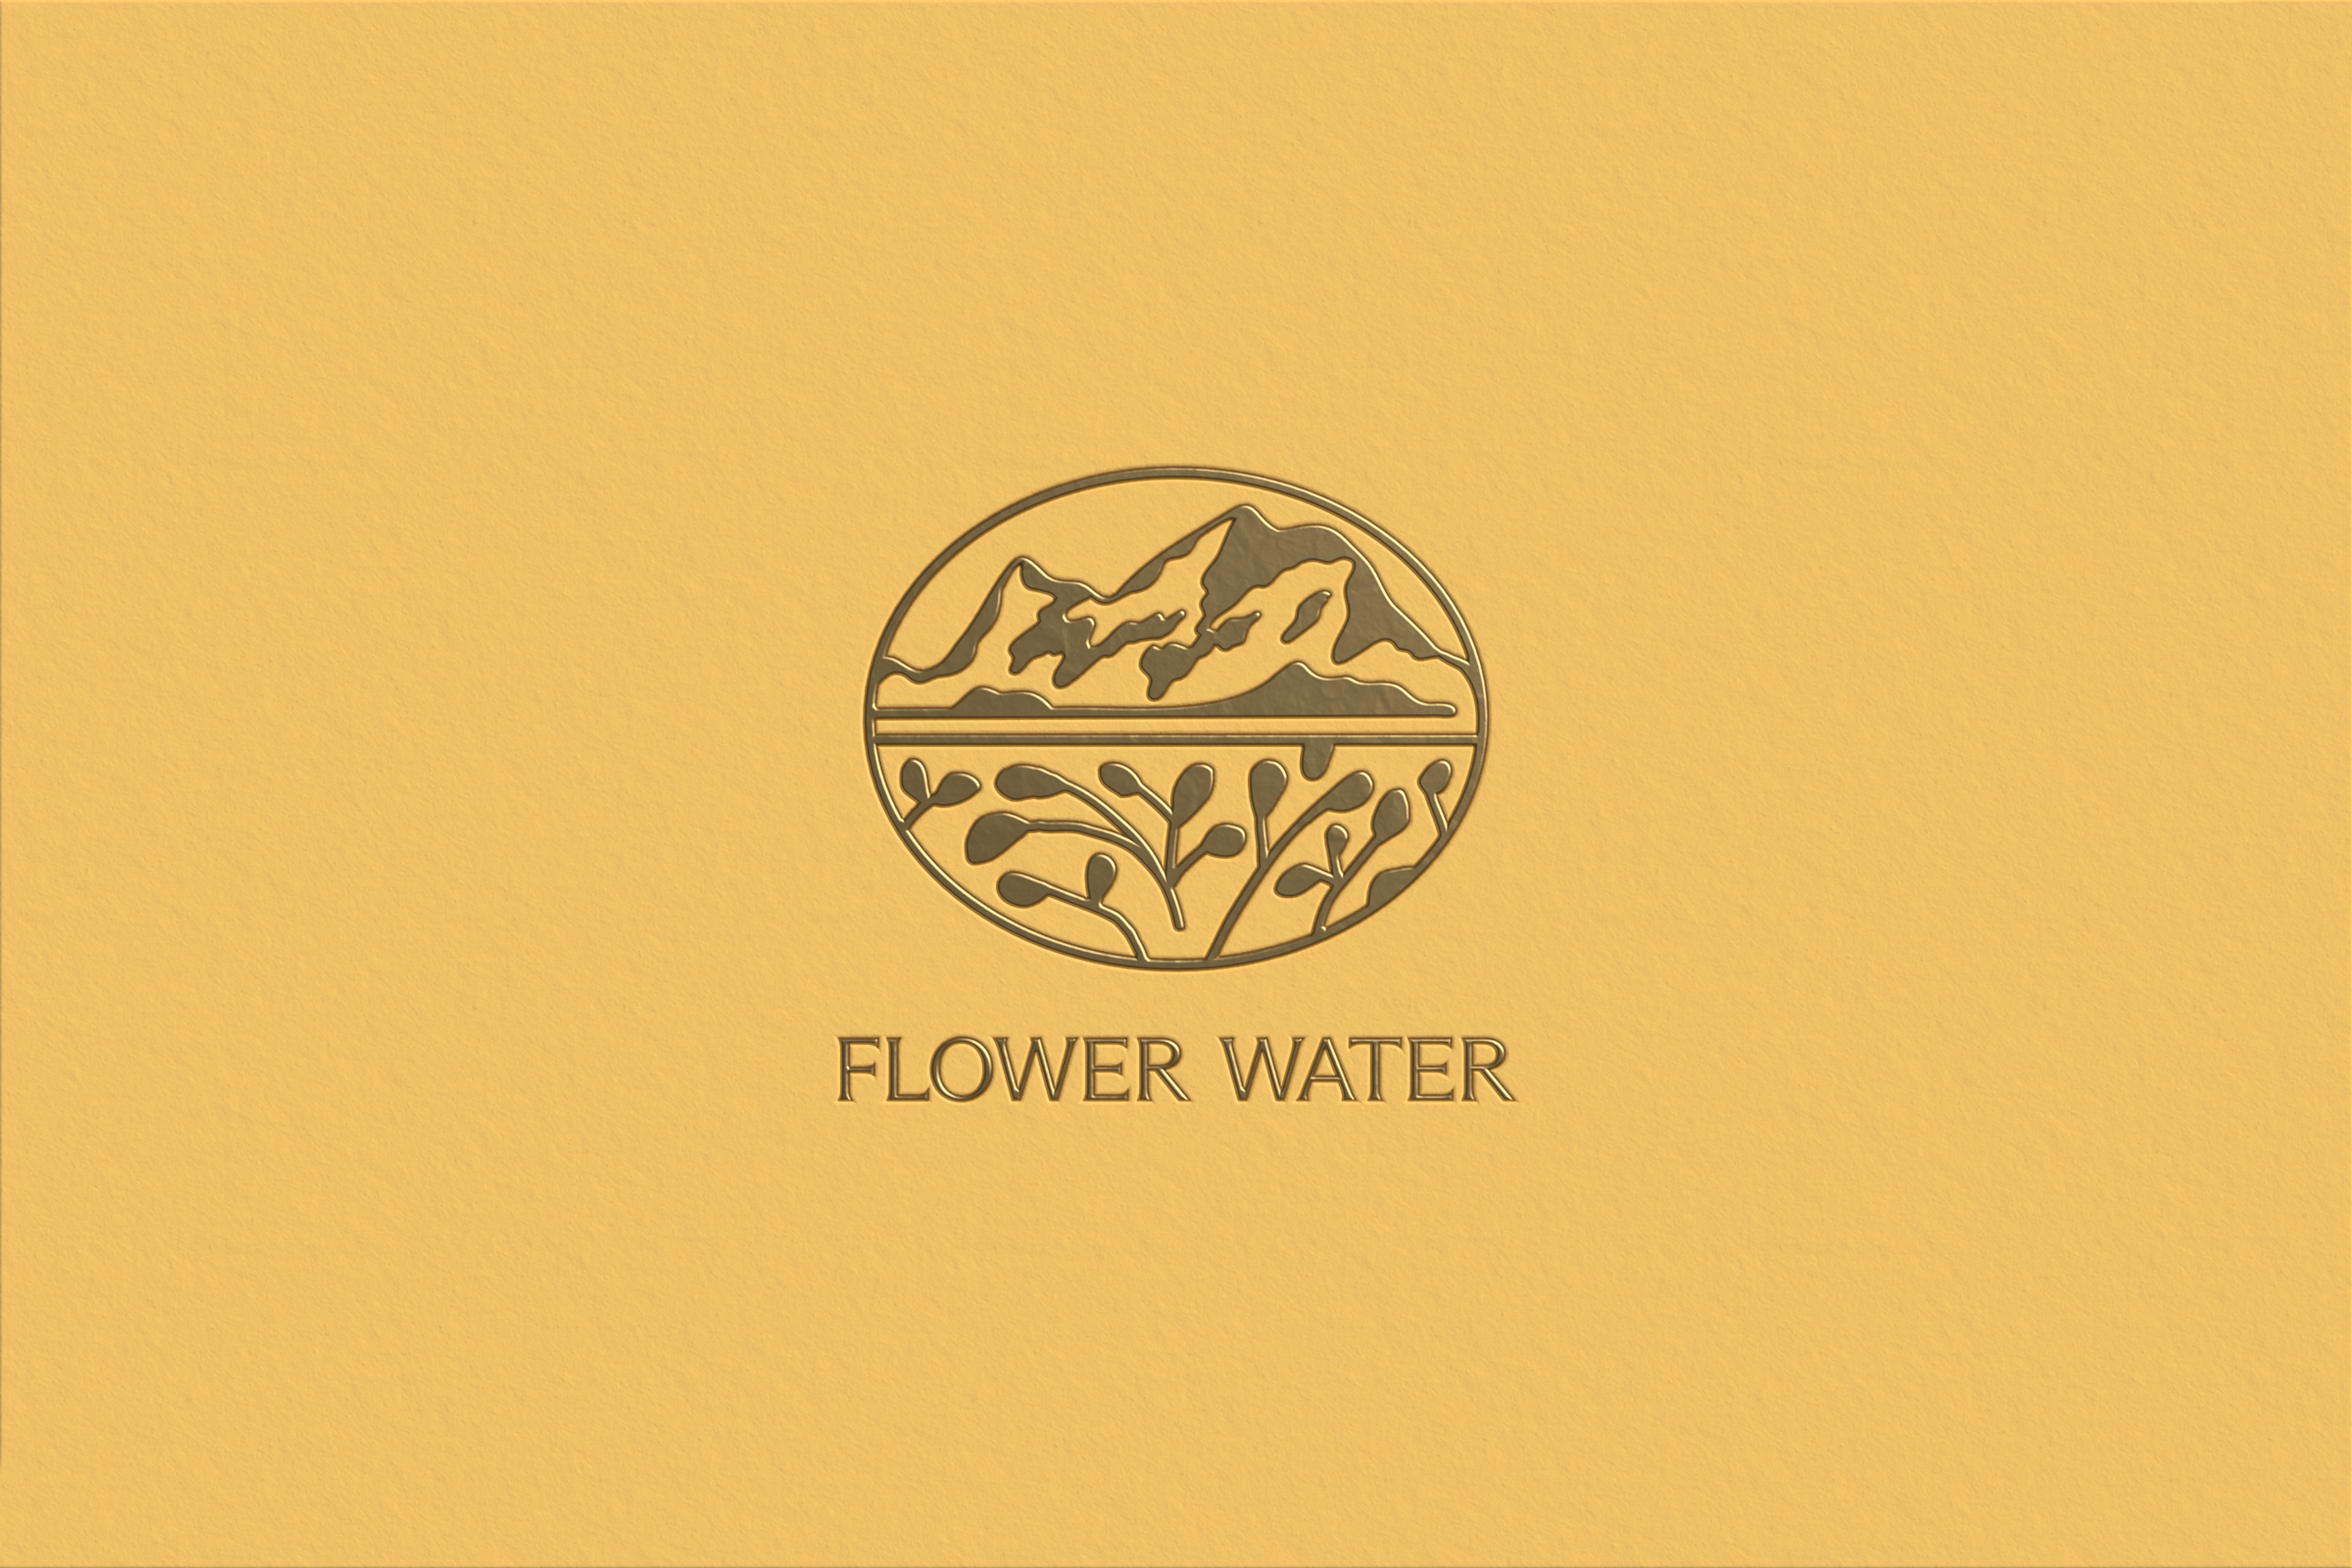 Two Are - Flower Water